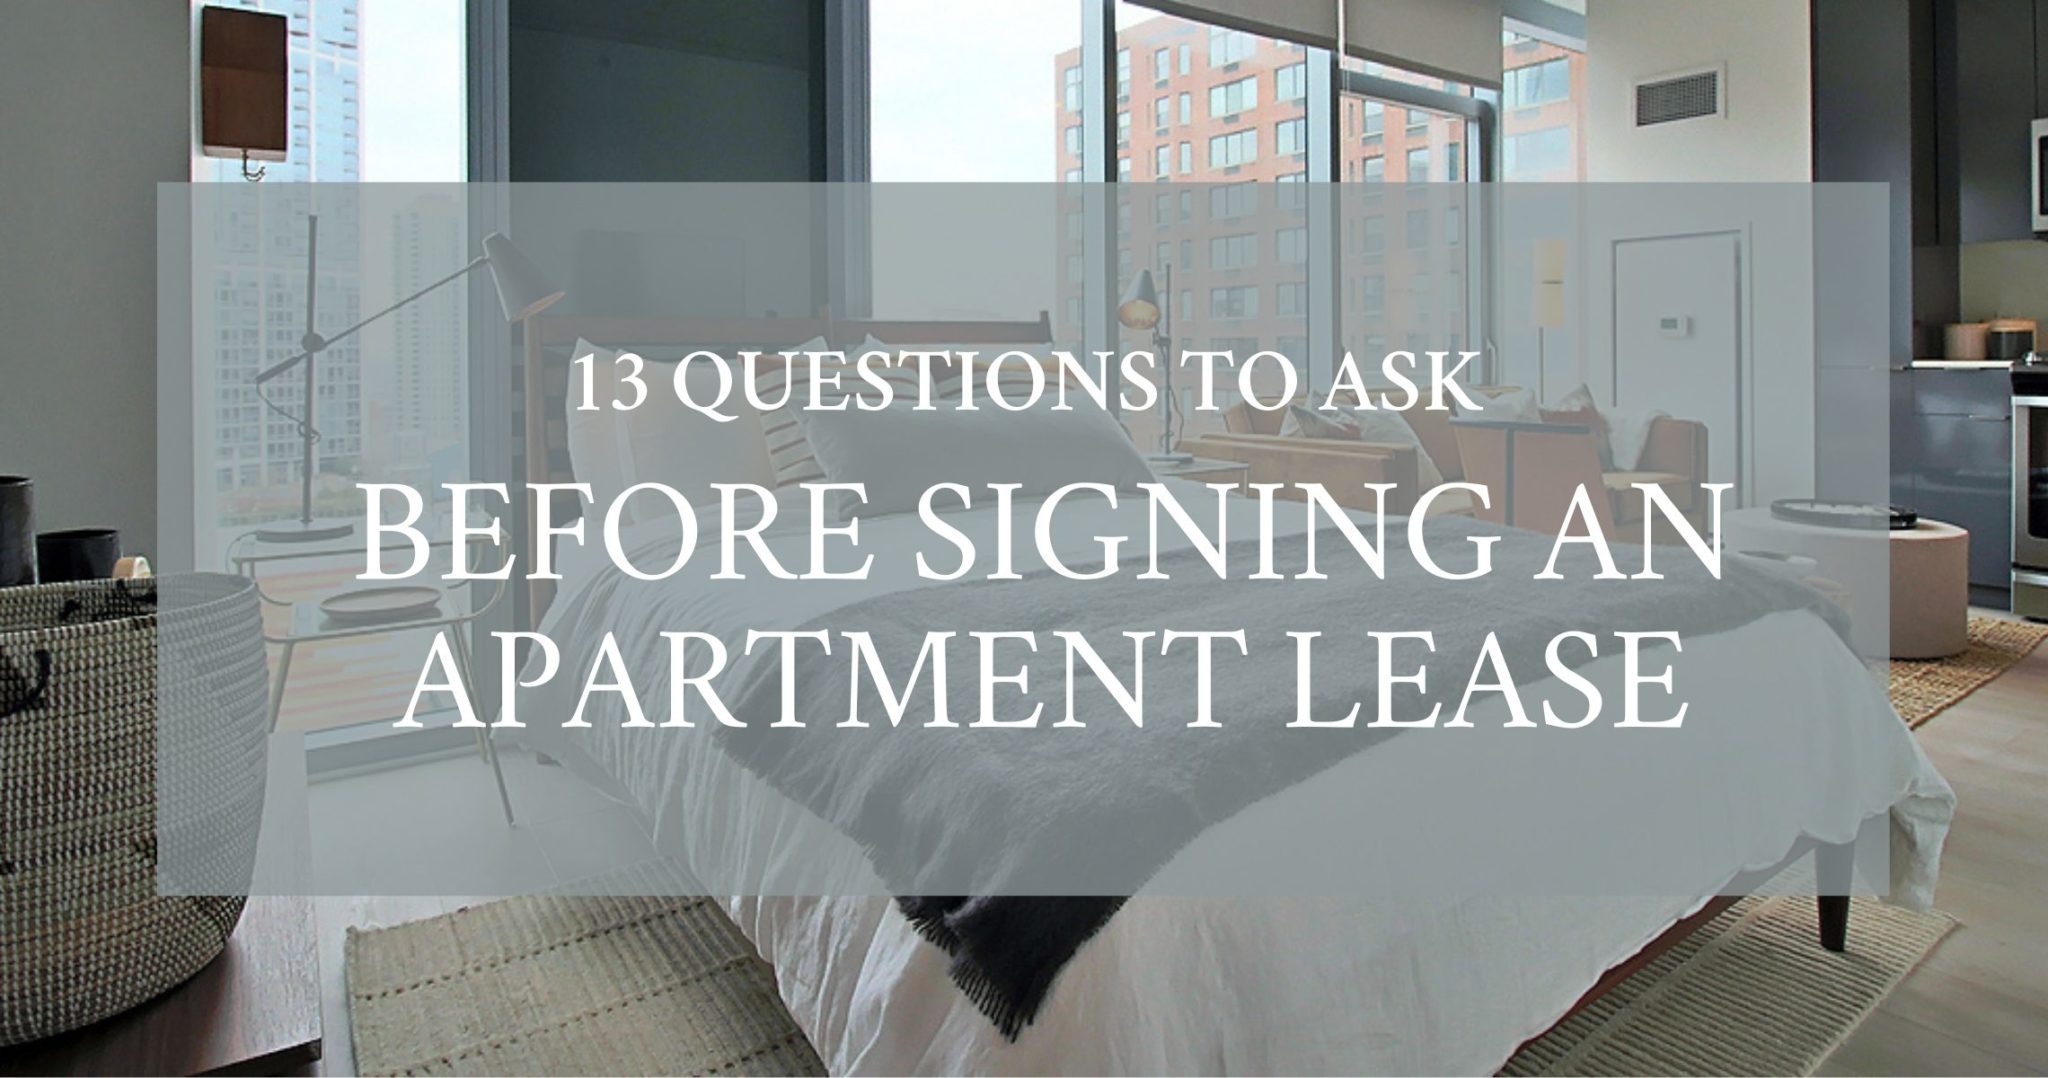 13 Questions to Ask Before Signing an Apartment Lease